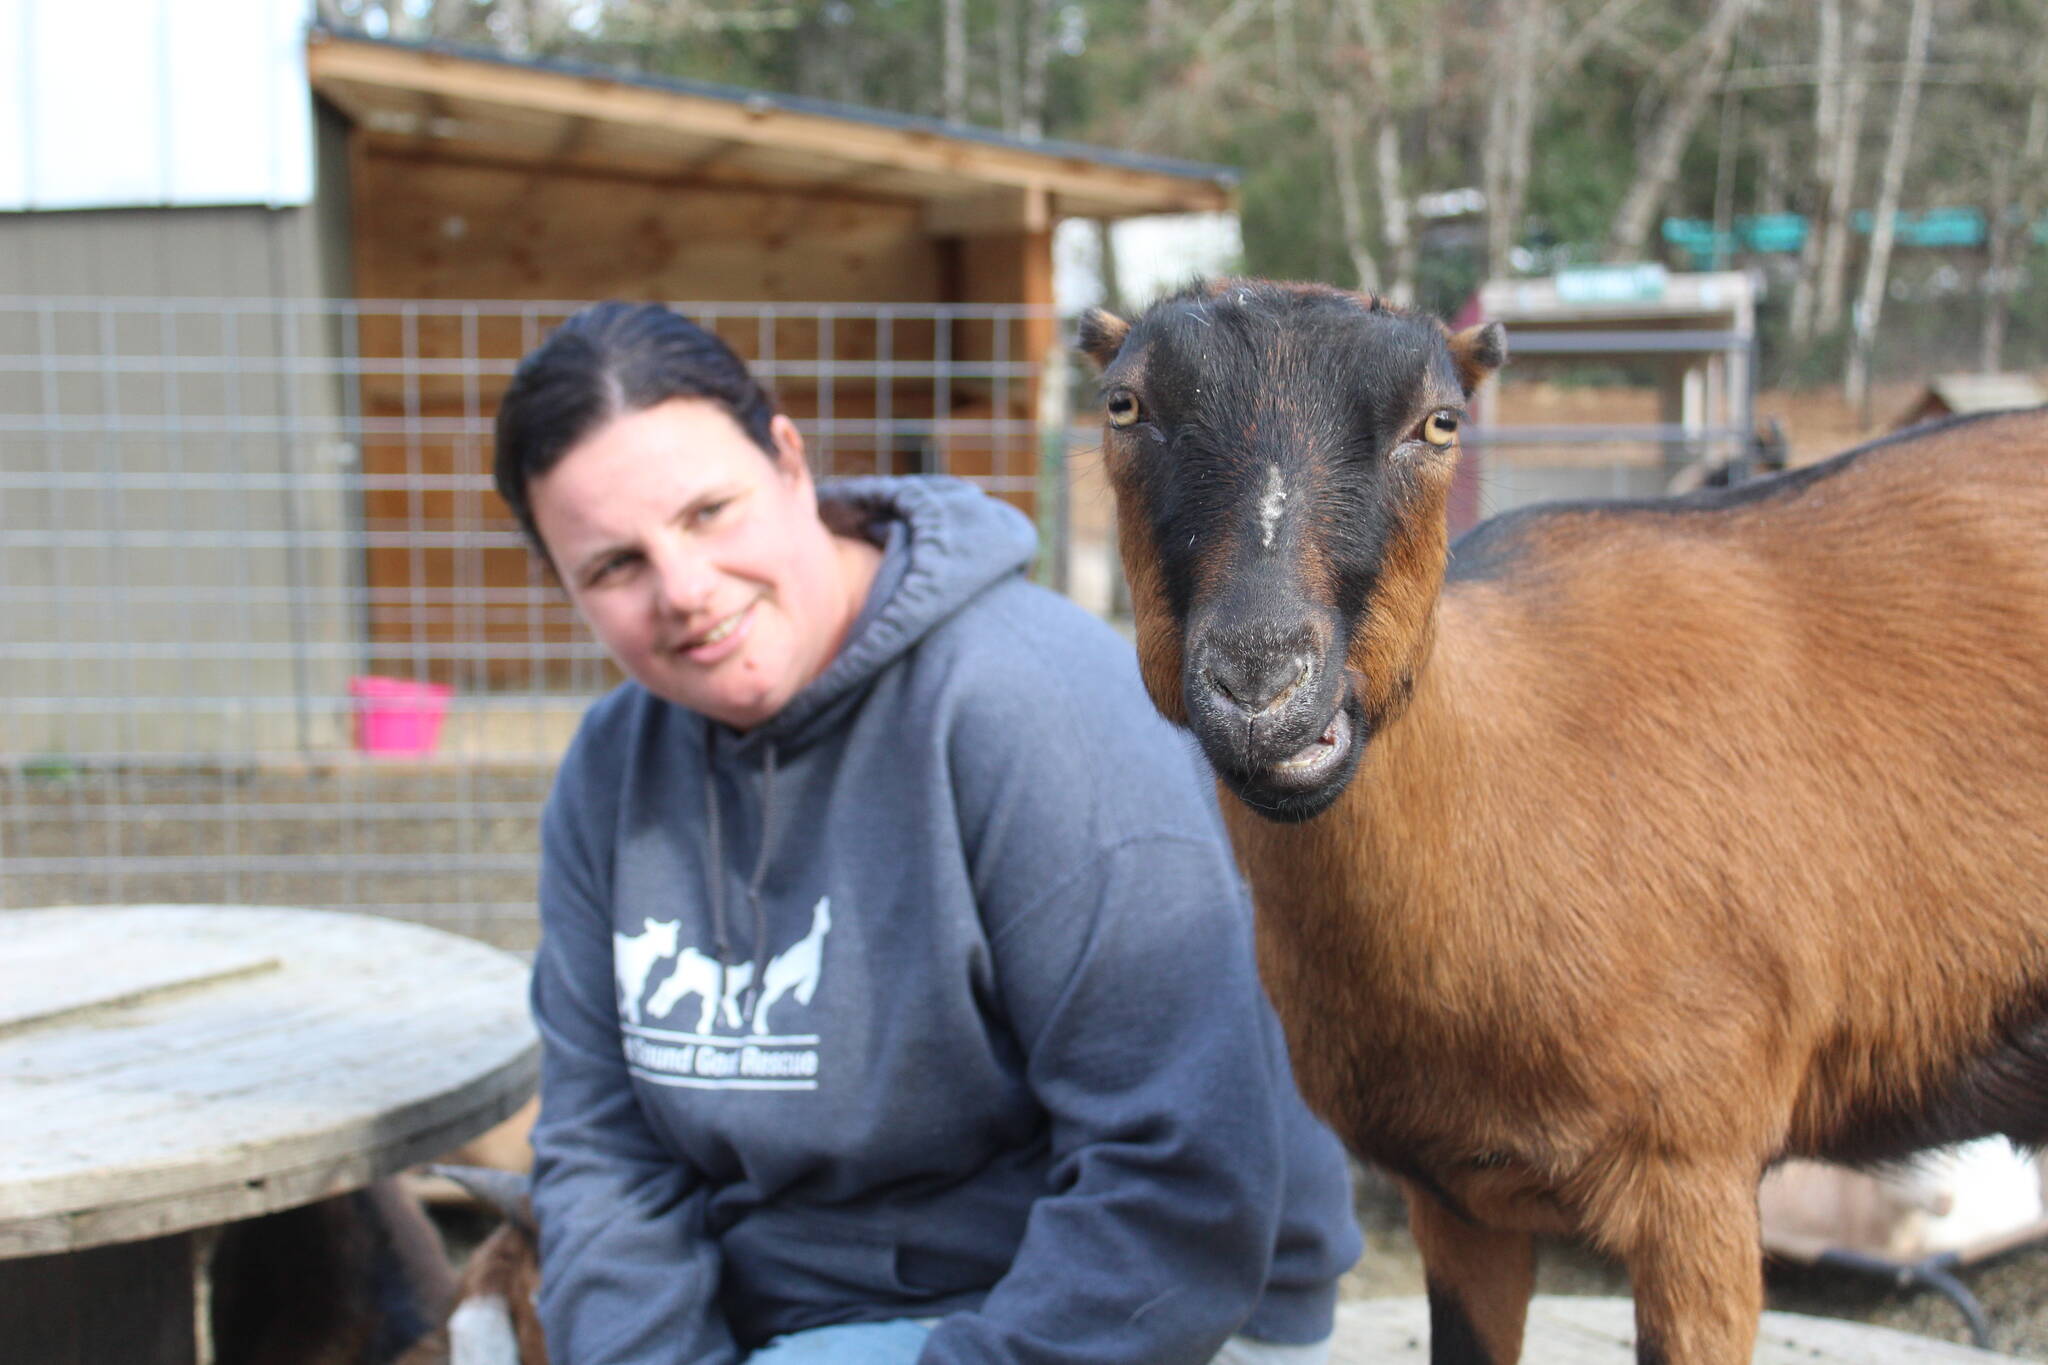 Photos by Bailey Jo Josie / Renton Reporter
Executive Director Sarah Klapstein says the Puget Sound Goat Rescue saves 200 to 300 goats a year, especially around the big slaughter seasons of Easter and Ramadan.